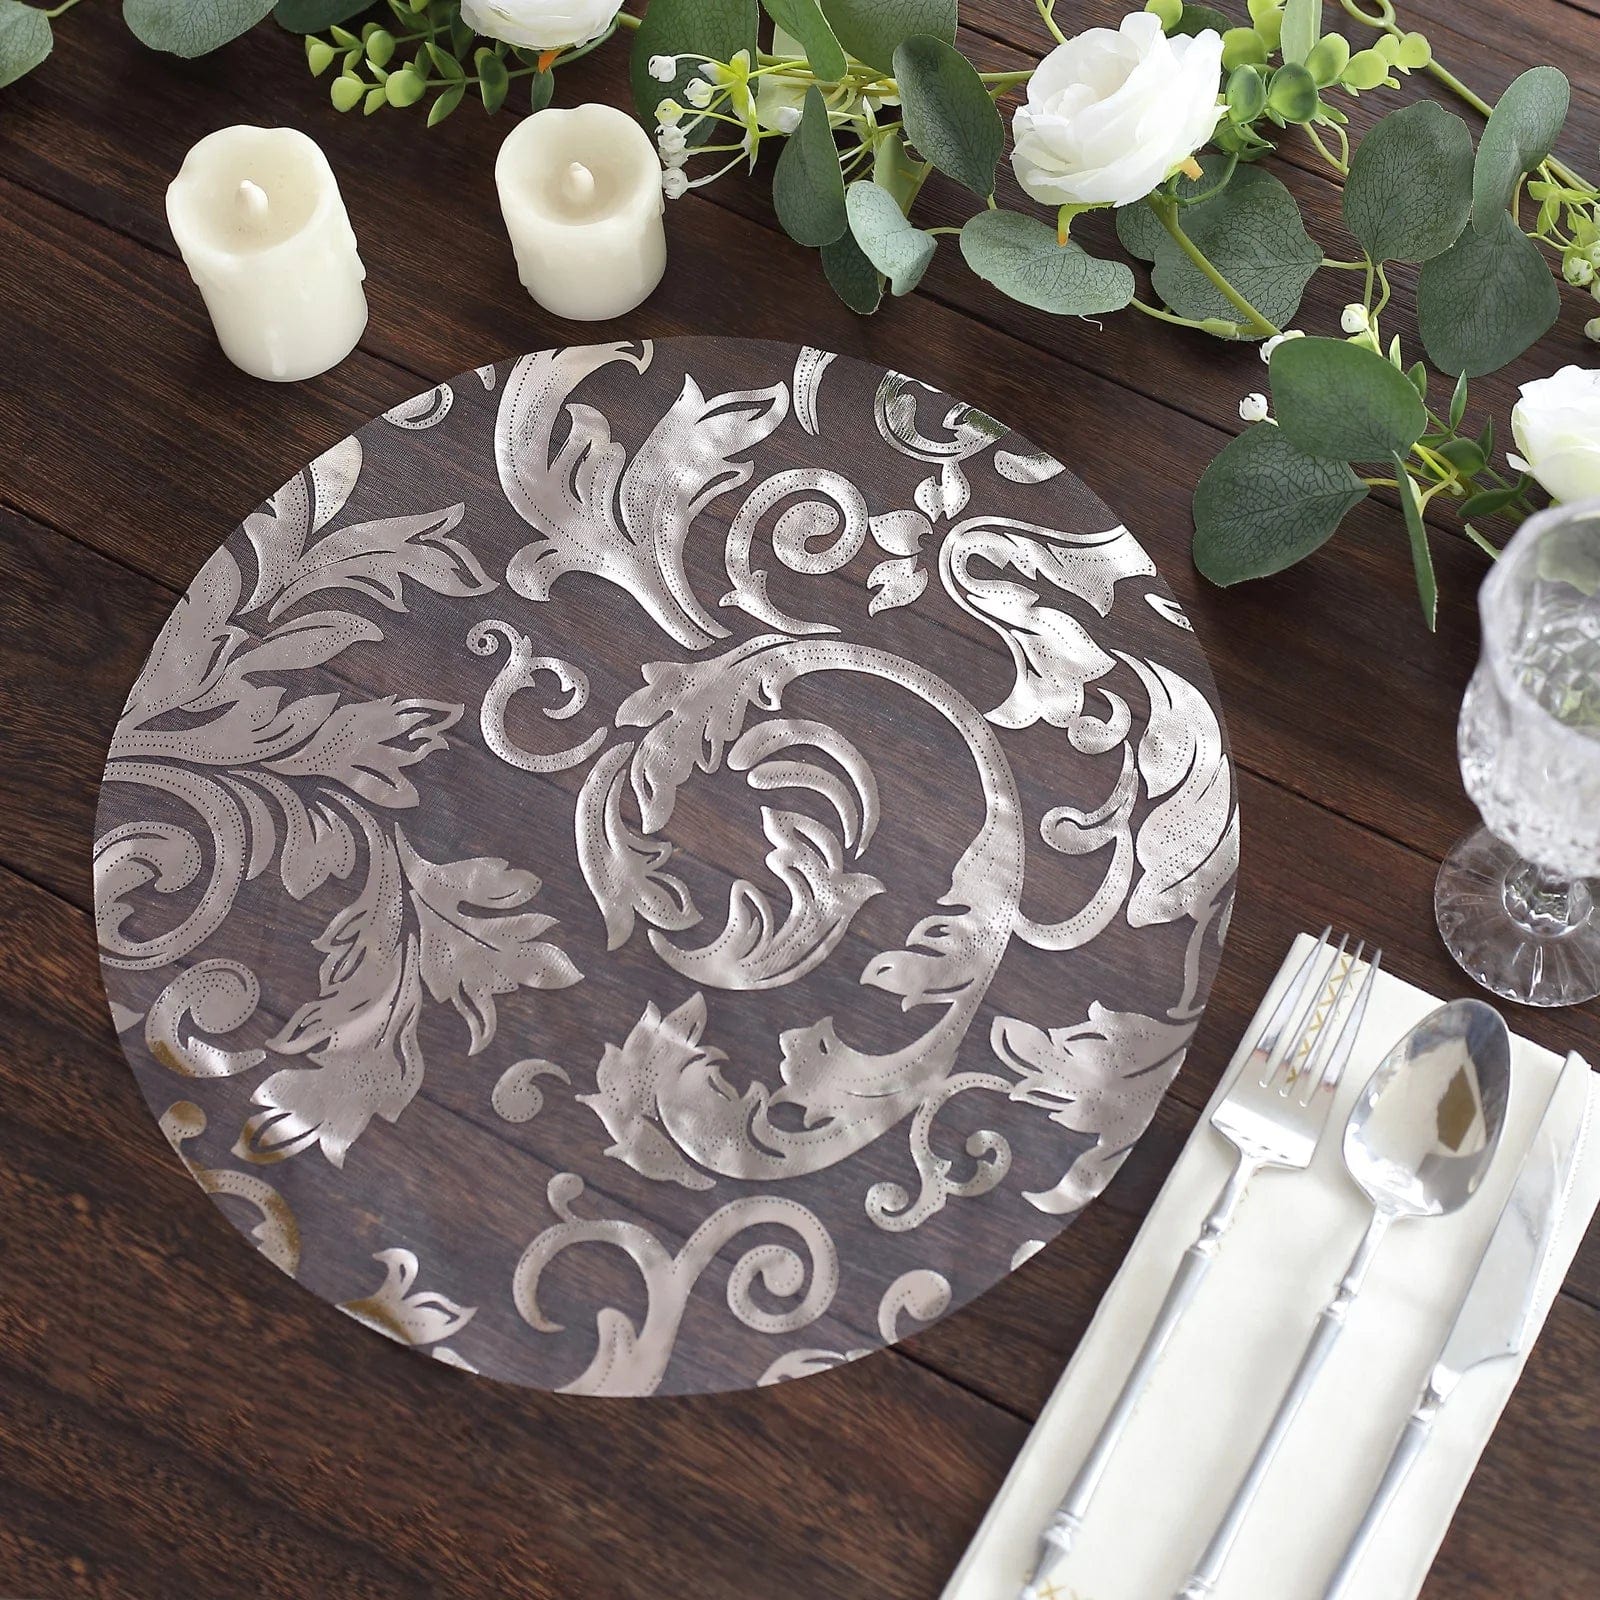 10 Round 13 in Sheer Organza Placemats with Metallic Swirl Foil Floral Design